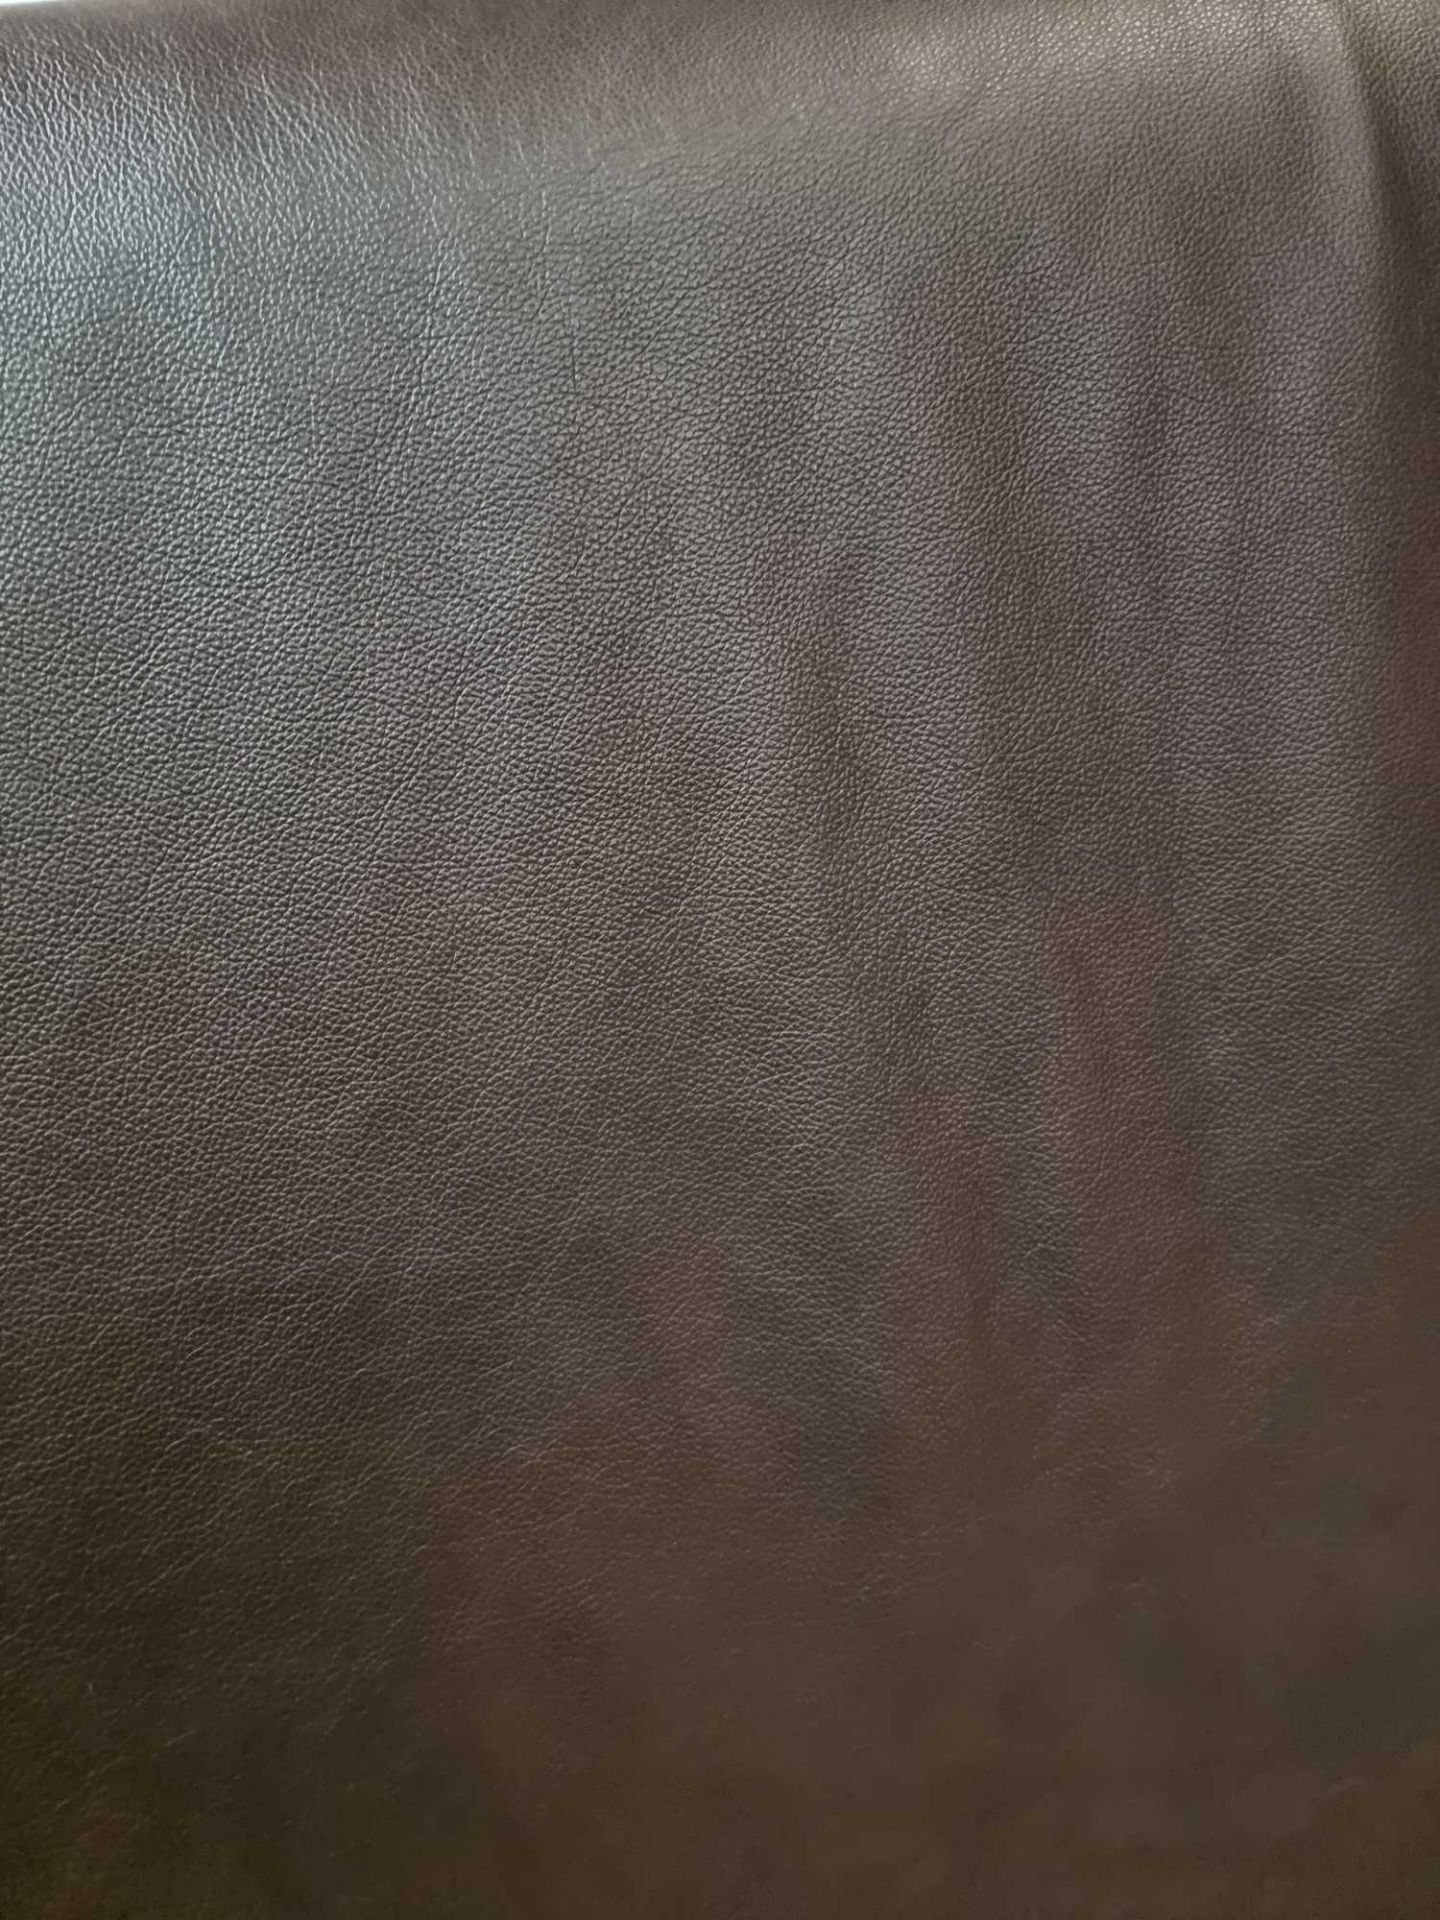 Chocolate Brown Leather Hide approximately 3.23mÂ² 1.9 x 1.7cm - Image 2 of 2